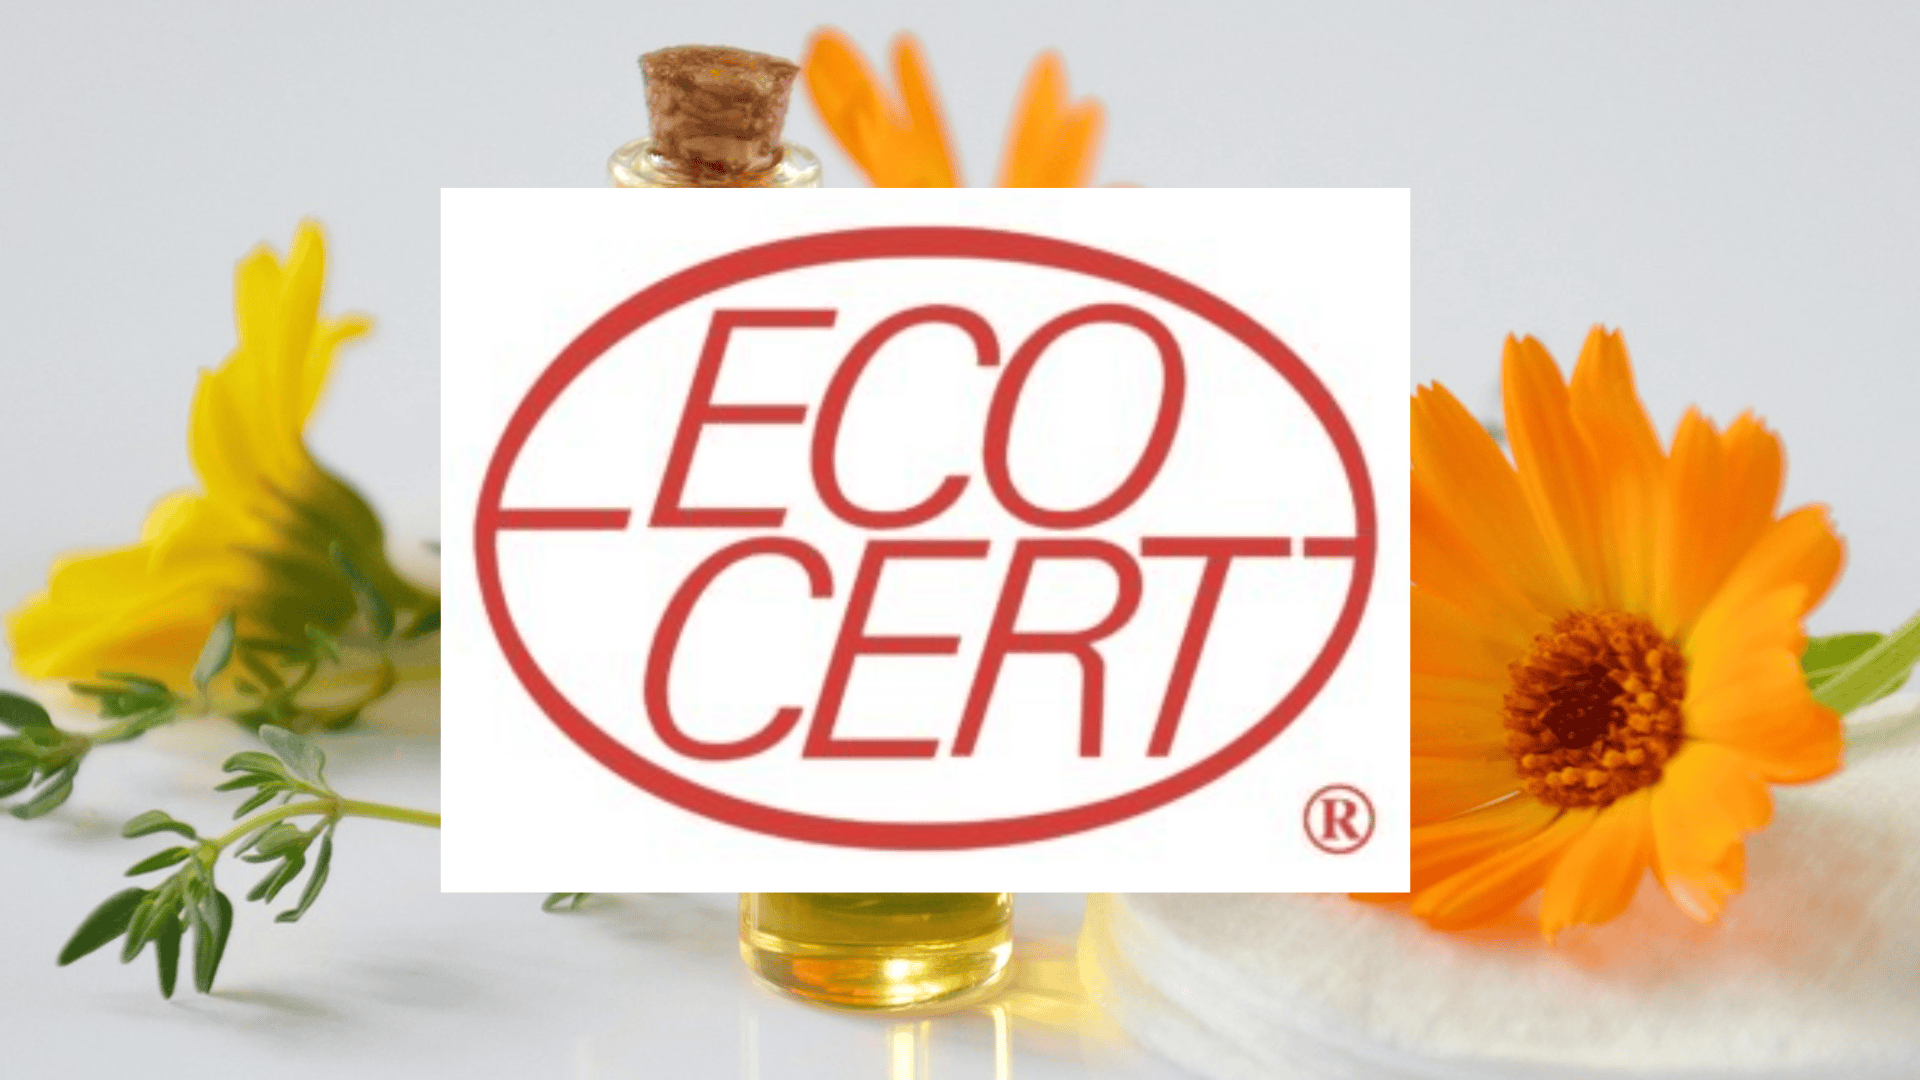 Ecocert – co to?